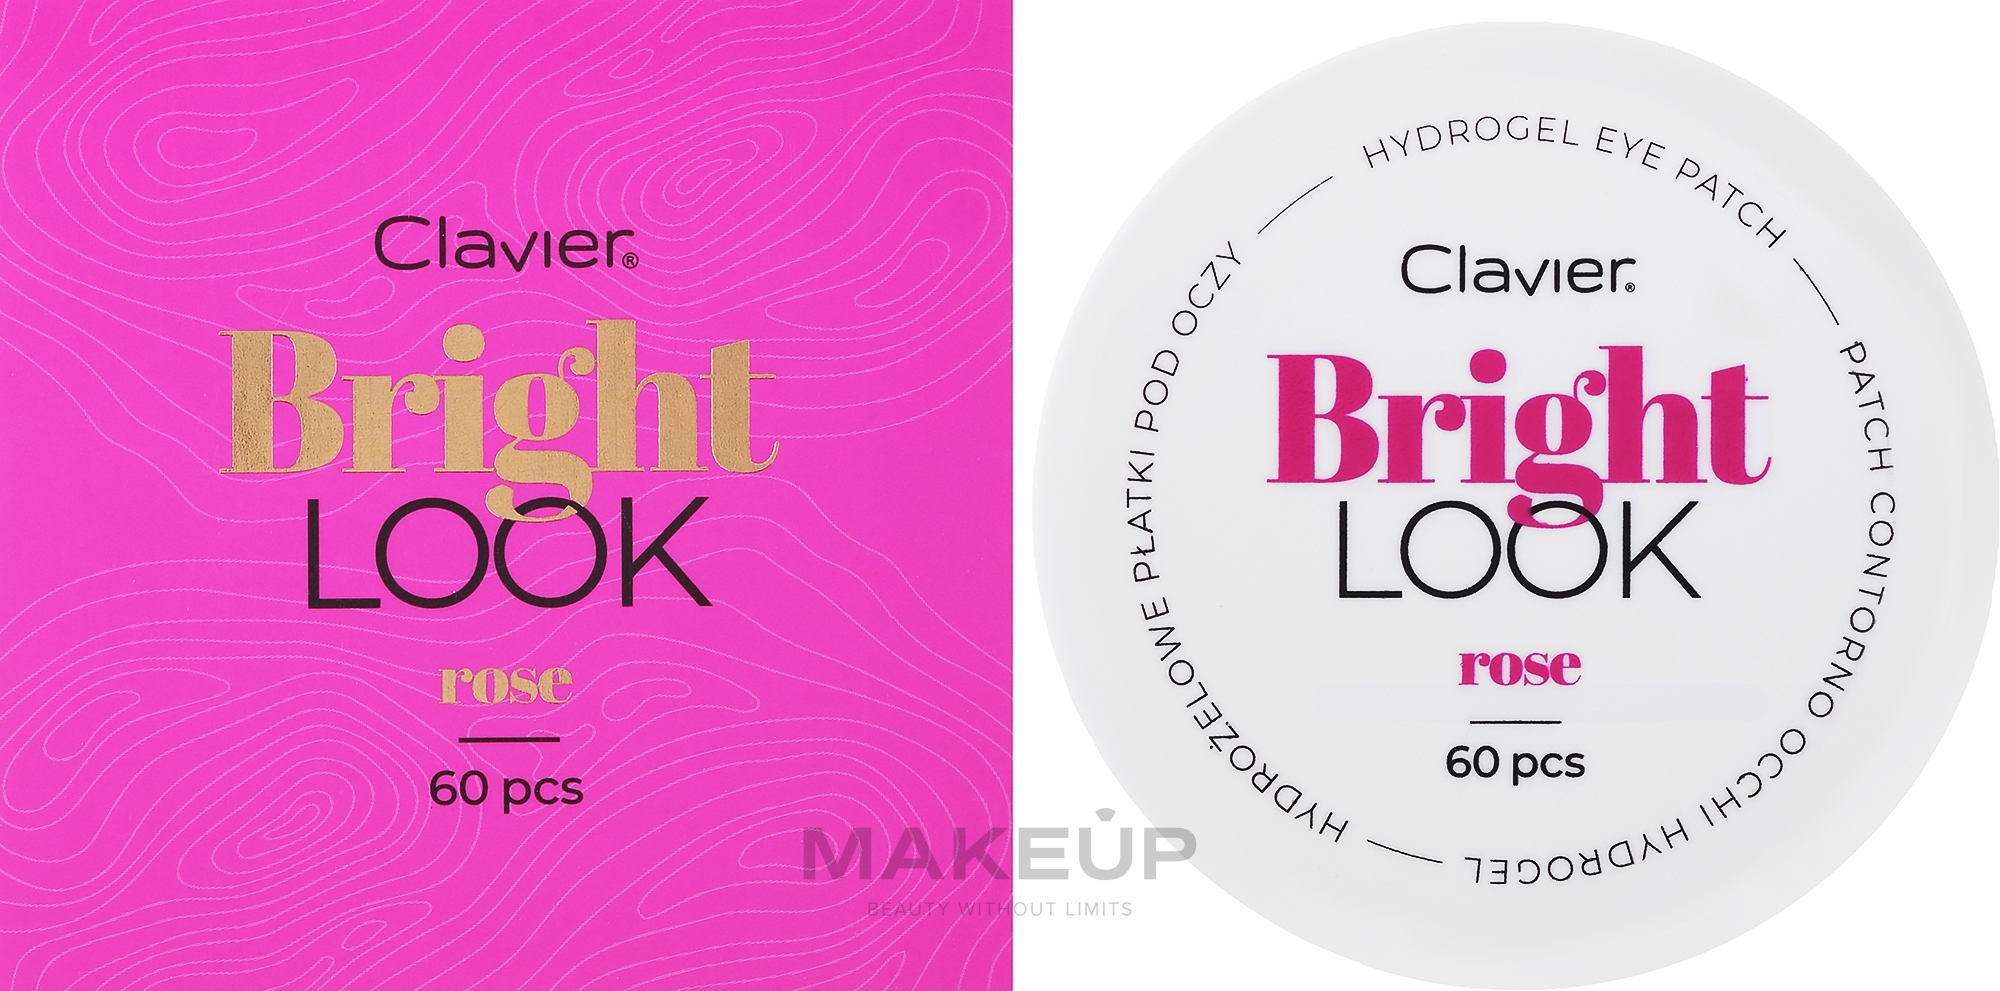 Rose Hydrogel Eye Patches - Clavier Bright Look Rose Hydrogel Eye Patch — photo 60 szt.